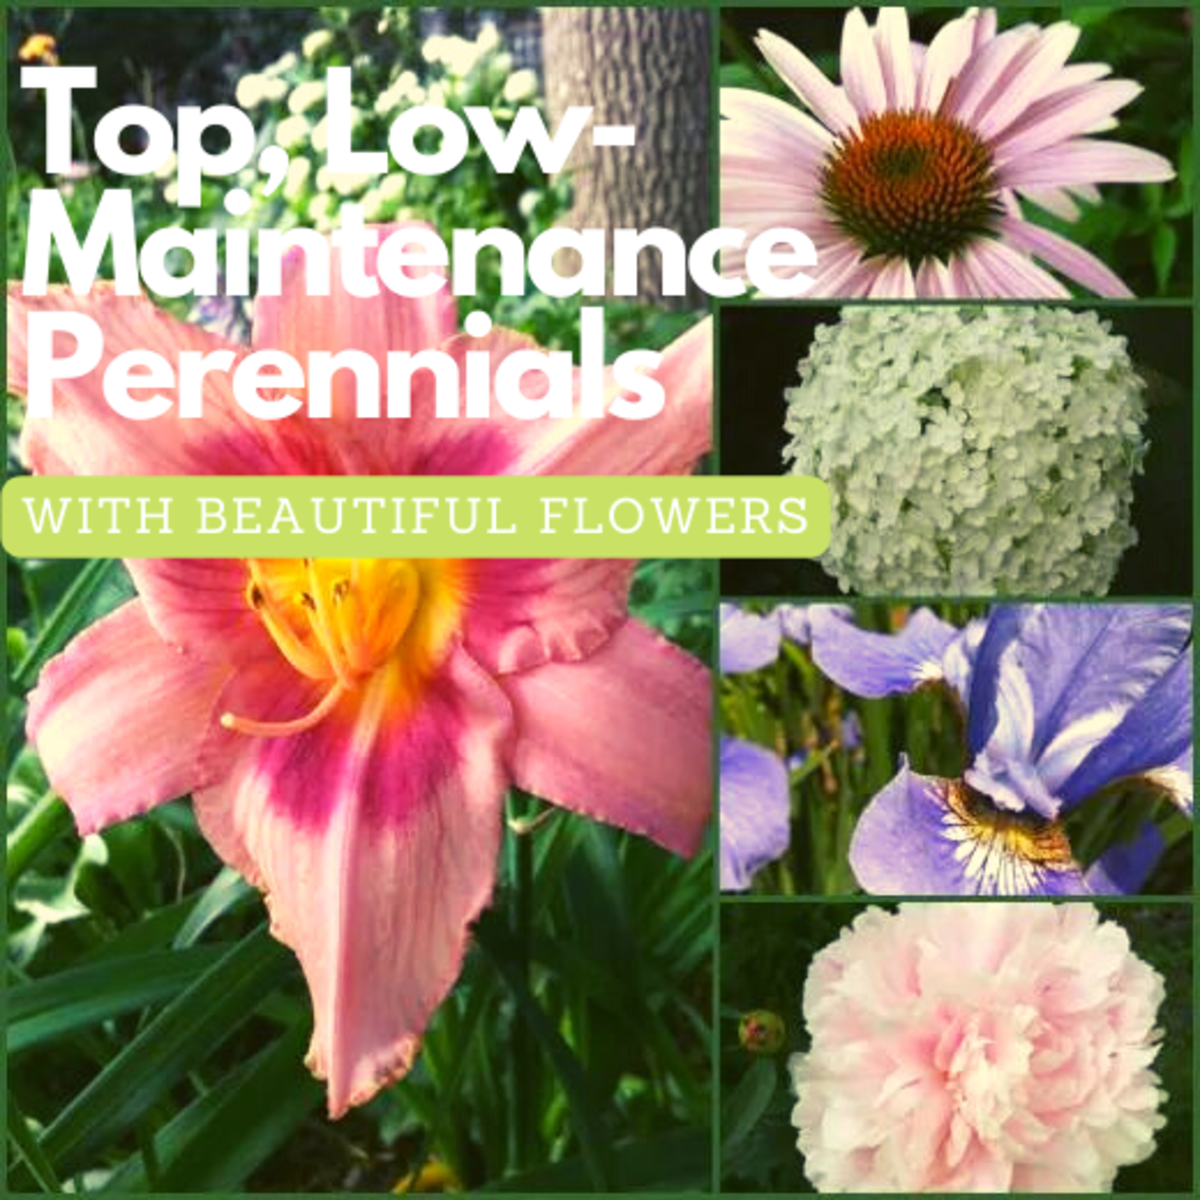 Low-maintenance perennials with beautiful flowers include coneflowers, hydrangea, irises, peonies and day lilies.